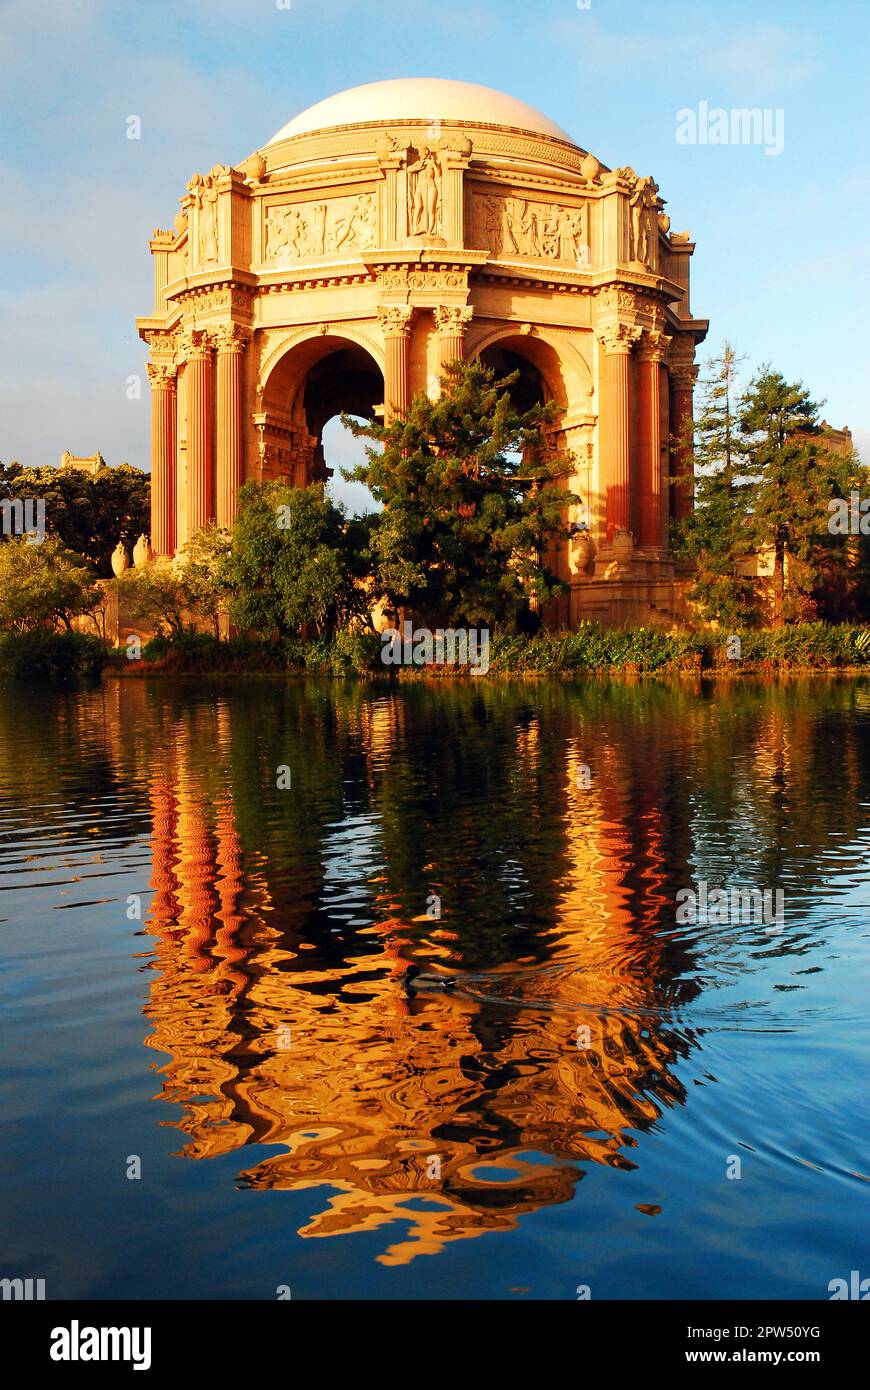 The Palace of Fine Arts, in San Francisco, sits in a park like setting in the city's Marina District Stock Photo